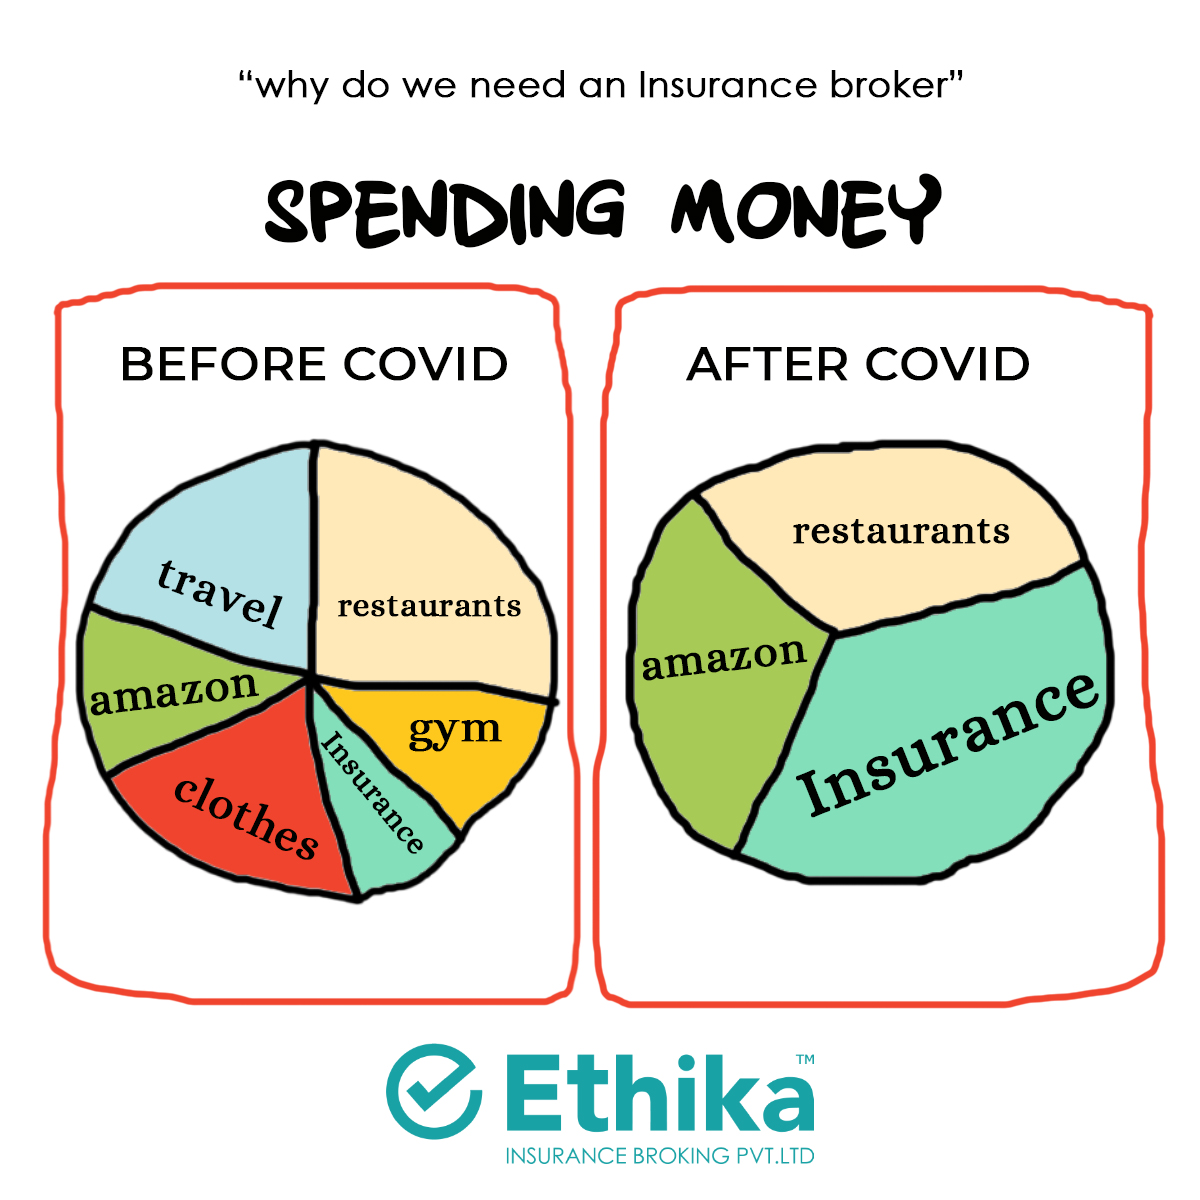 insurance fun meme - insurance demand before and after covid19